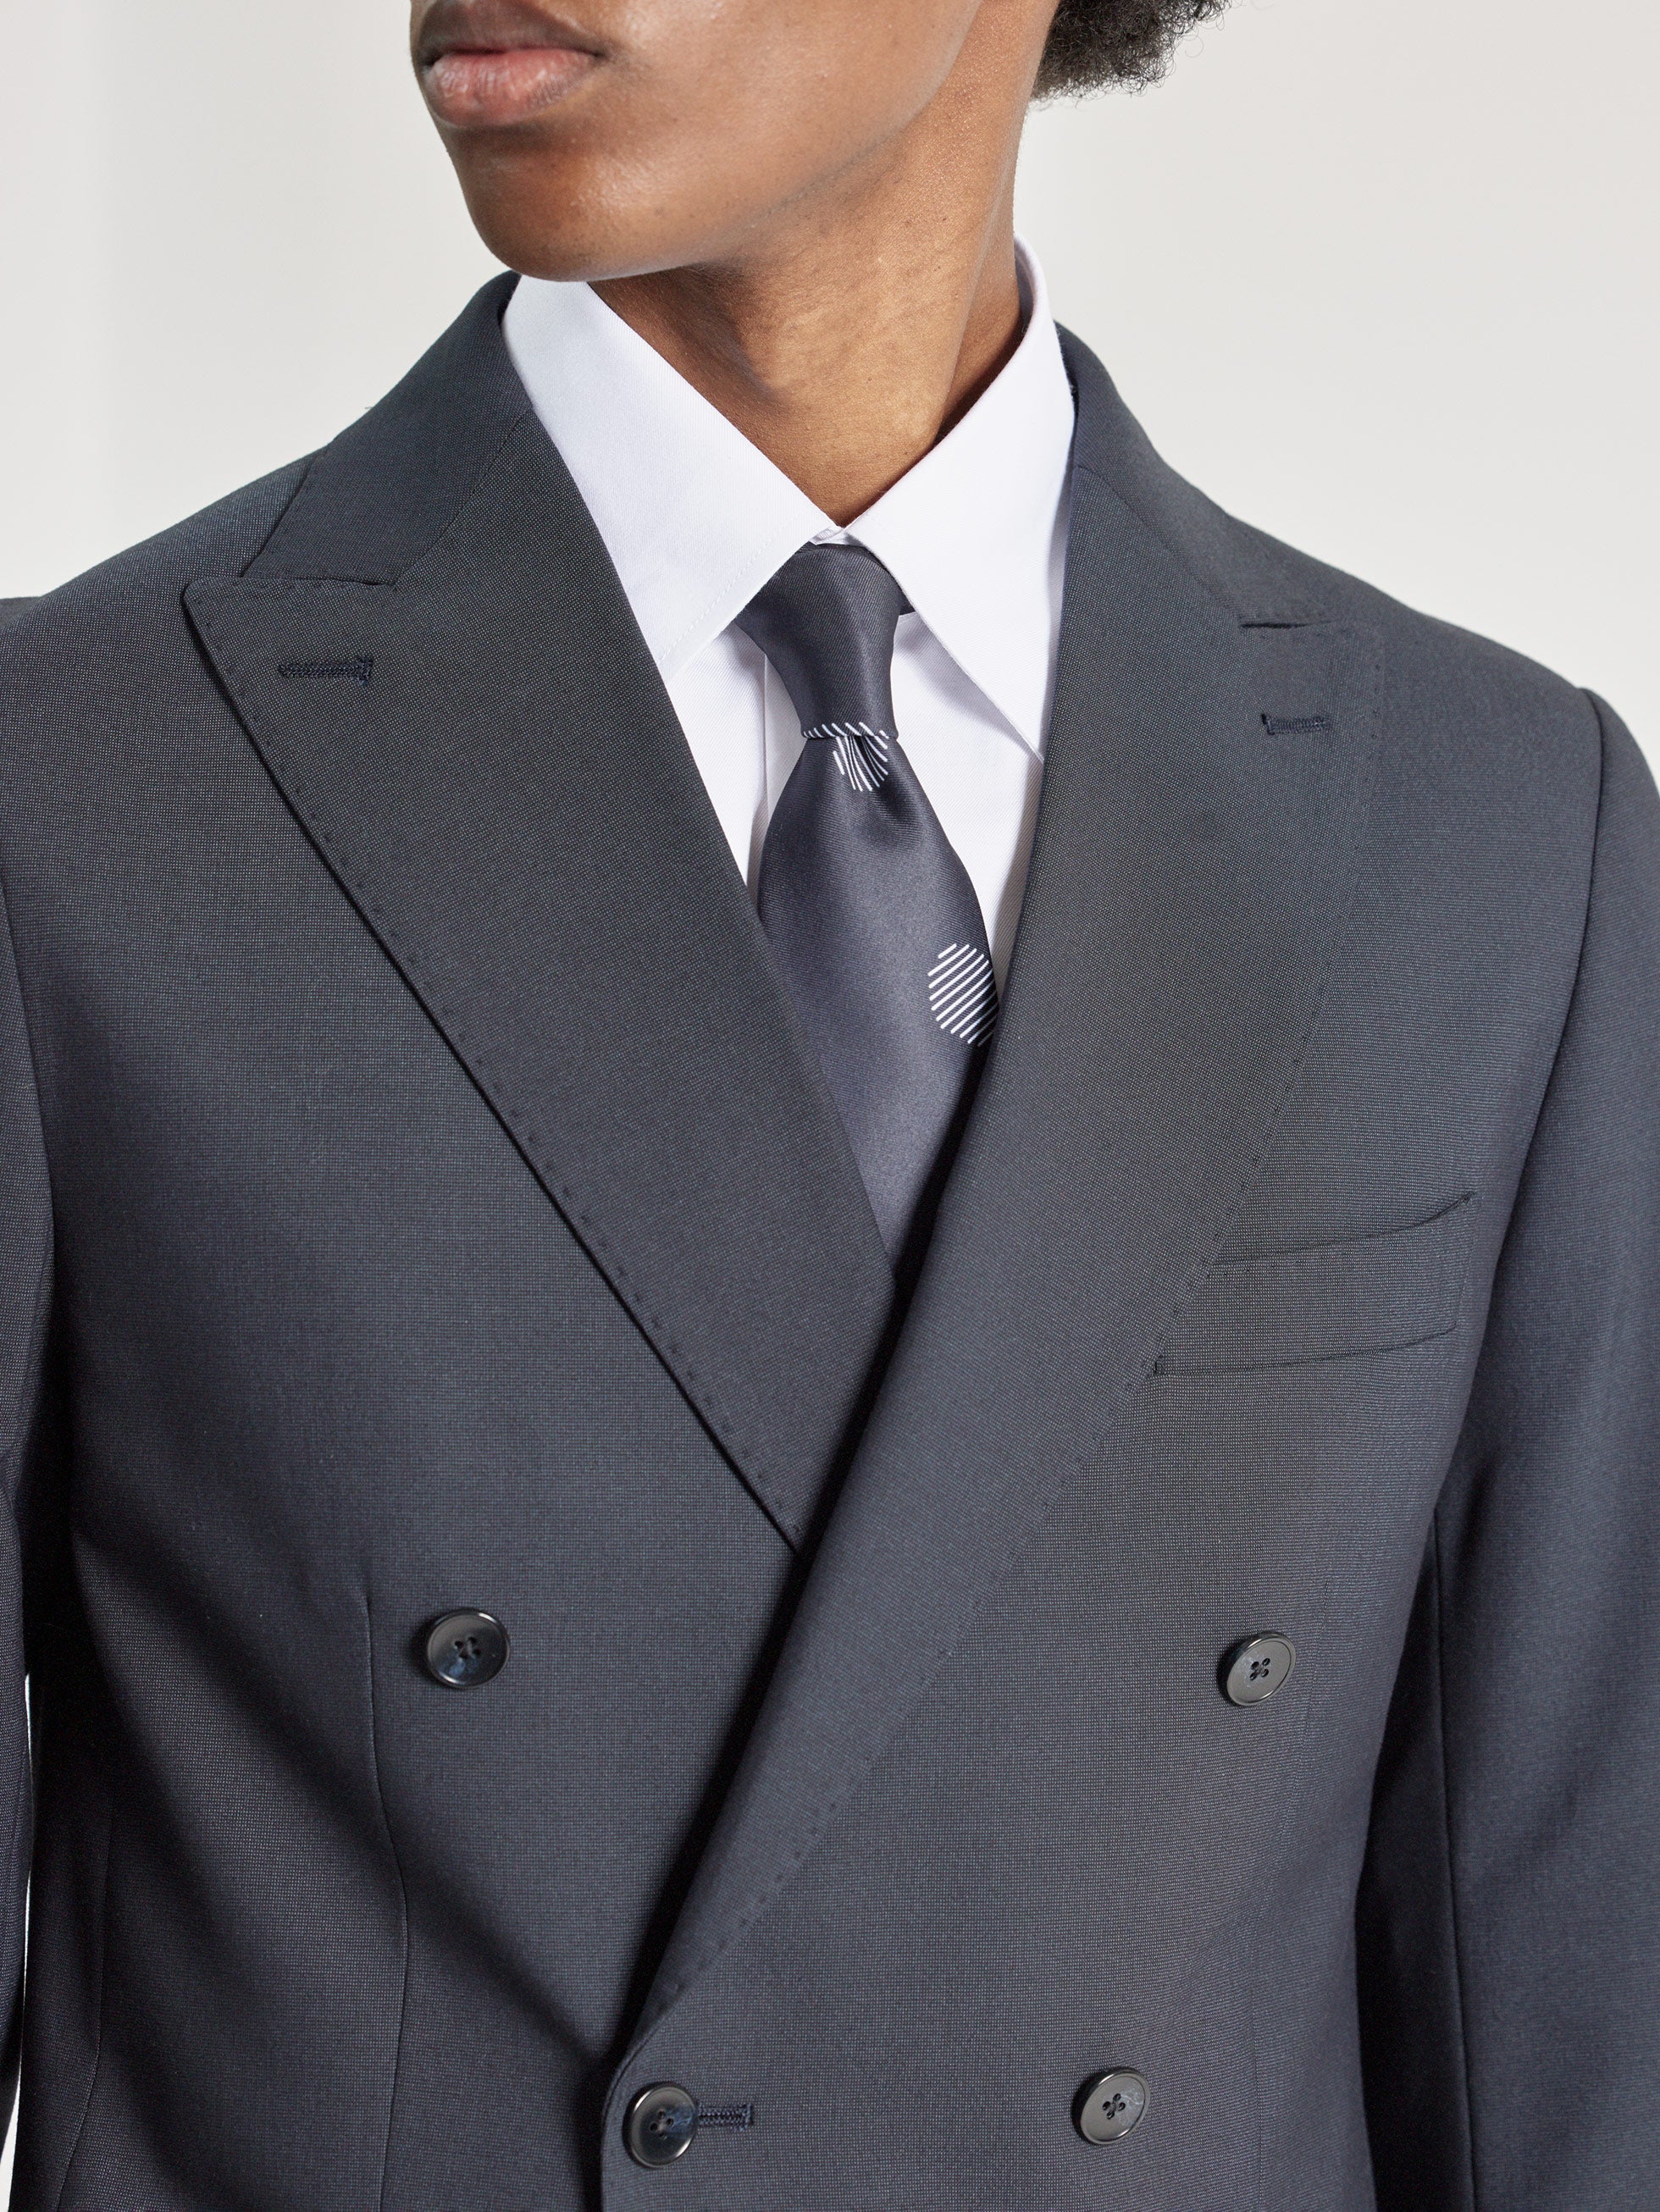 NAVY 6X2 DOUBLE-BREASTED SUIT